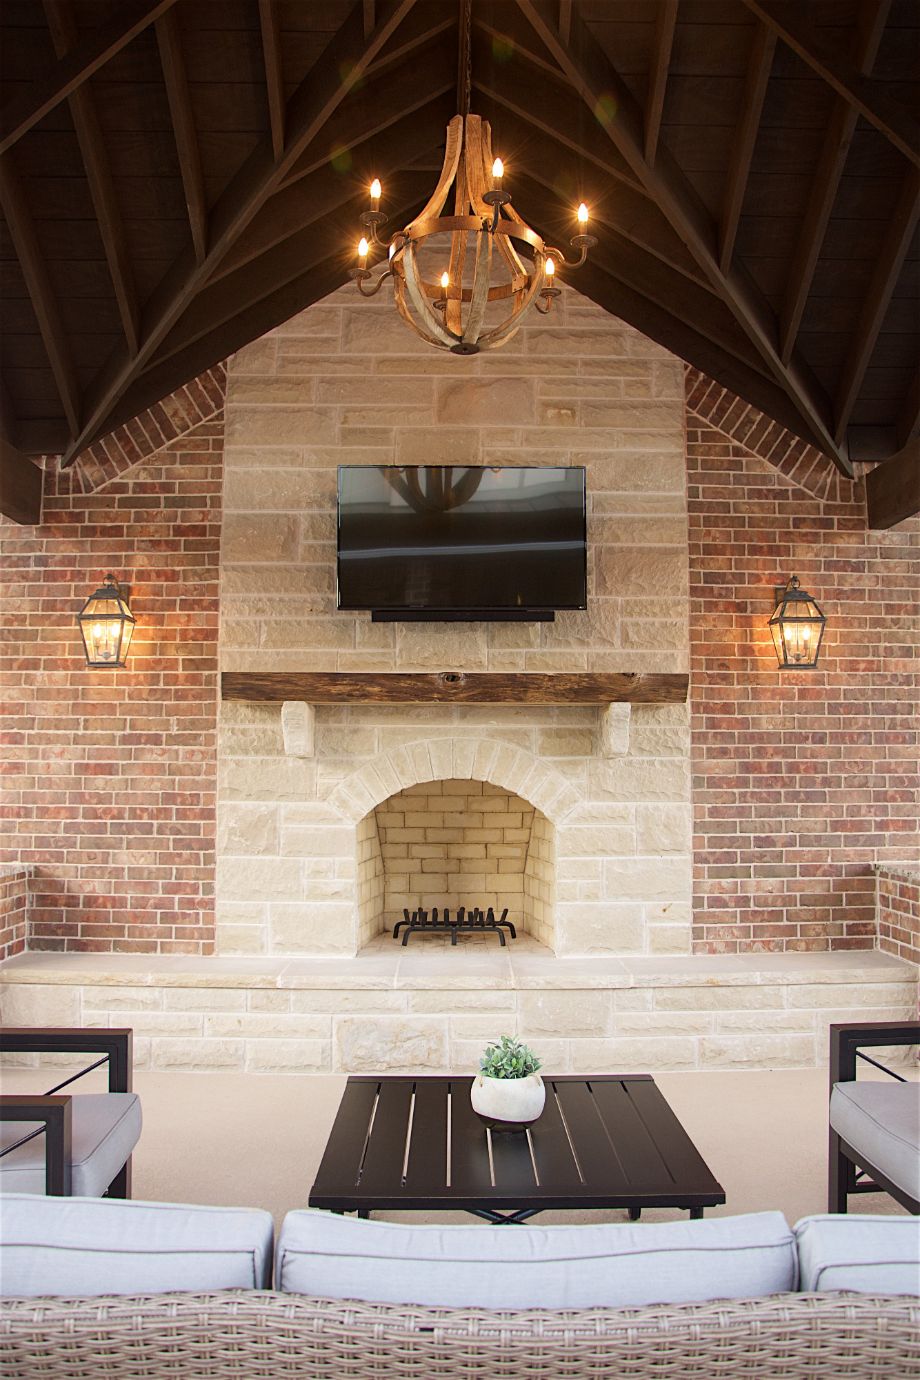 Outdoor Fireplace in Rustic Entertainment Center Featuring Brick and Lanturn